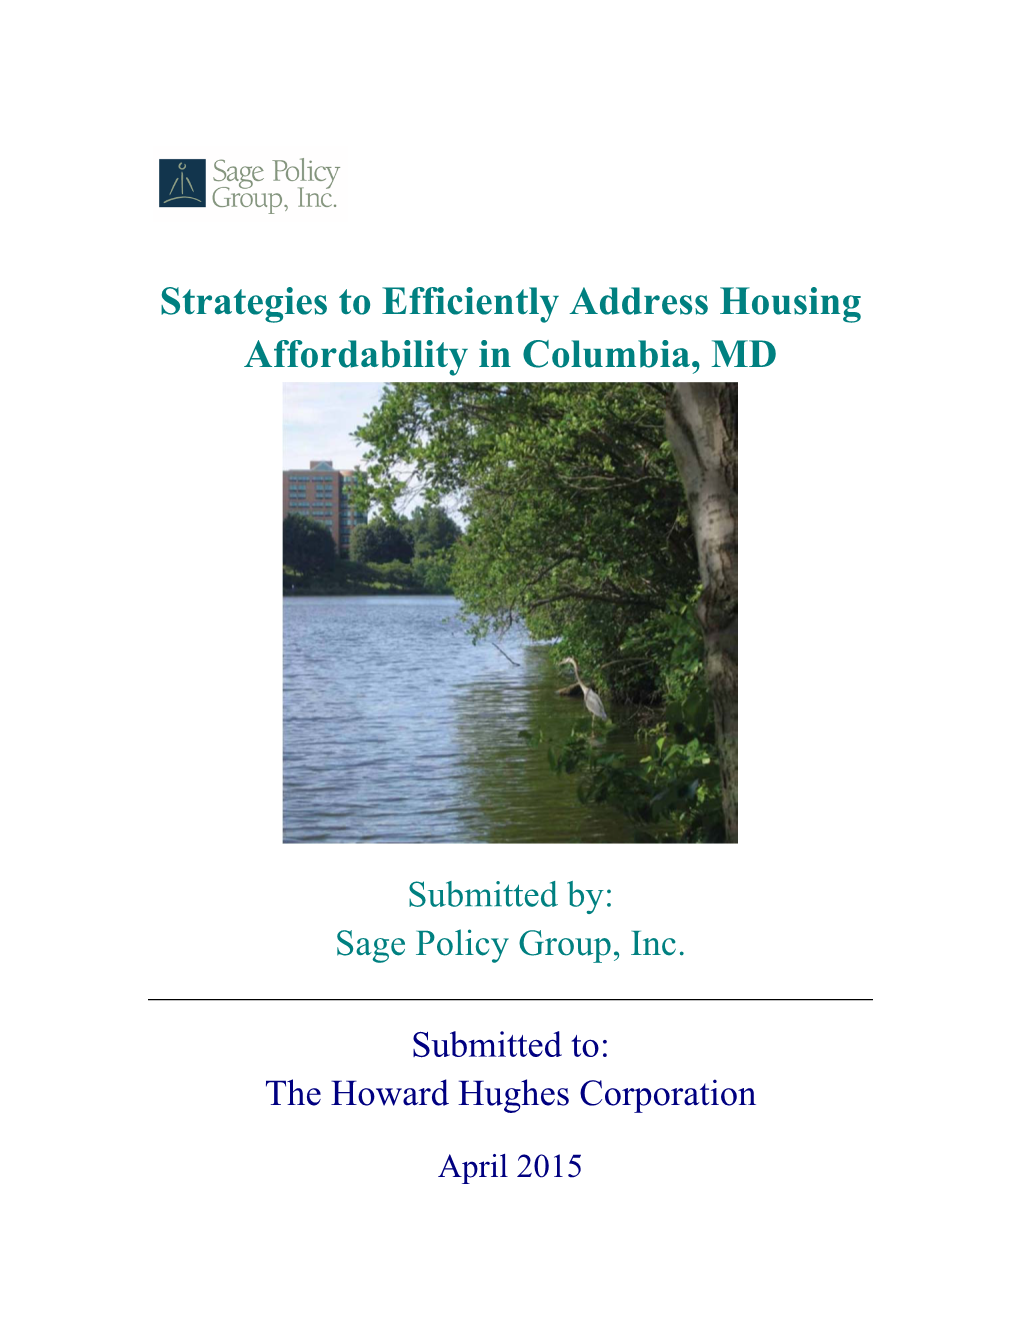 Strategies to Efficiently Address Housing Affordability in Columbia, MD